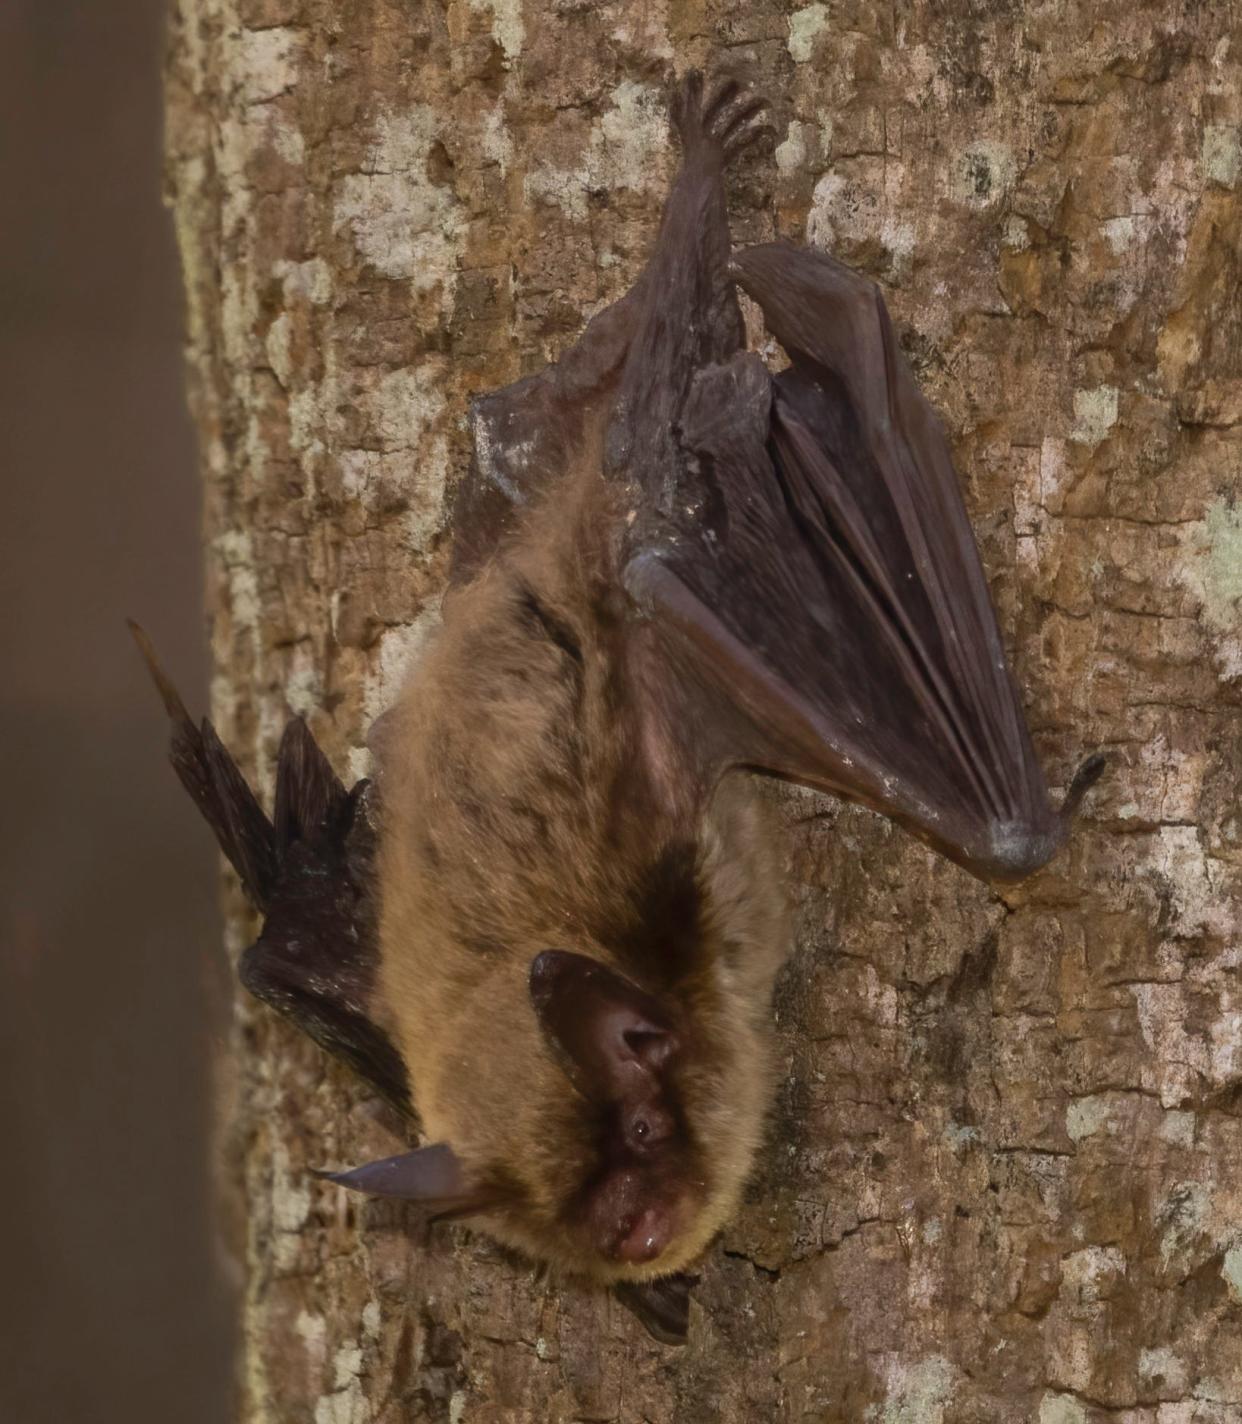 Previously one of the most common Ohio bat species, the northern long-eared bat is now one of the rarest bat species in the state due to population collapse.